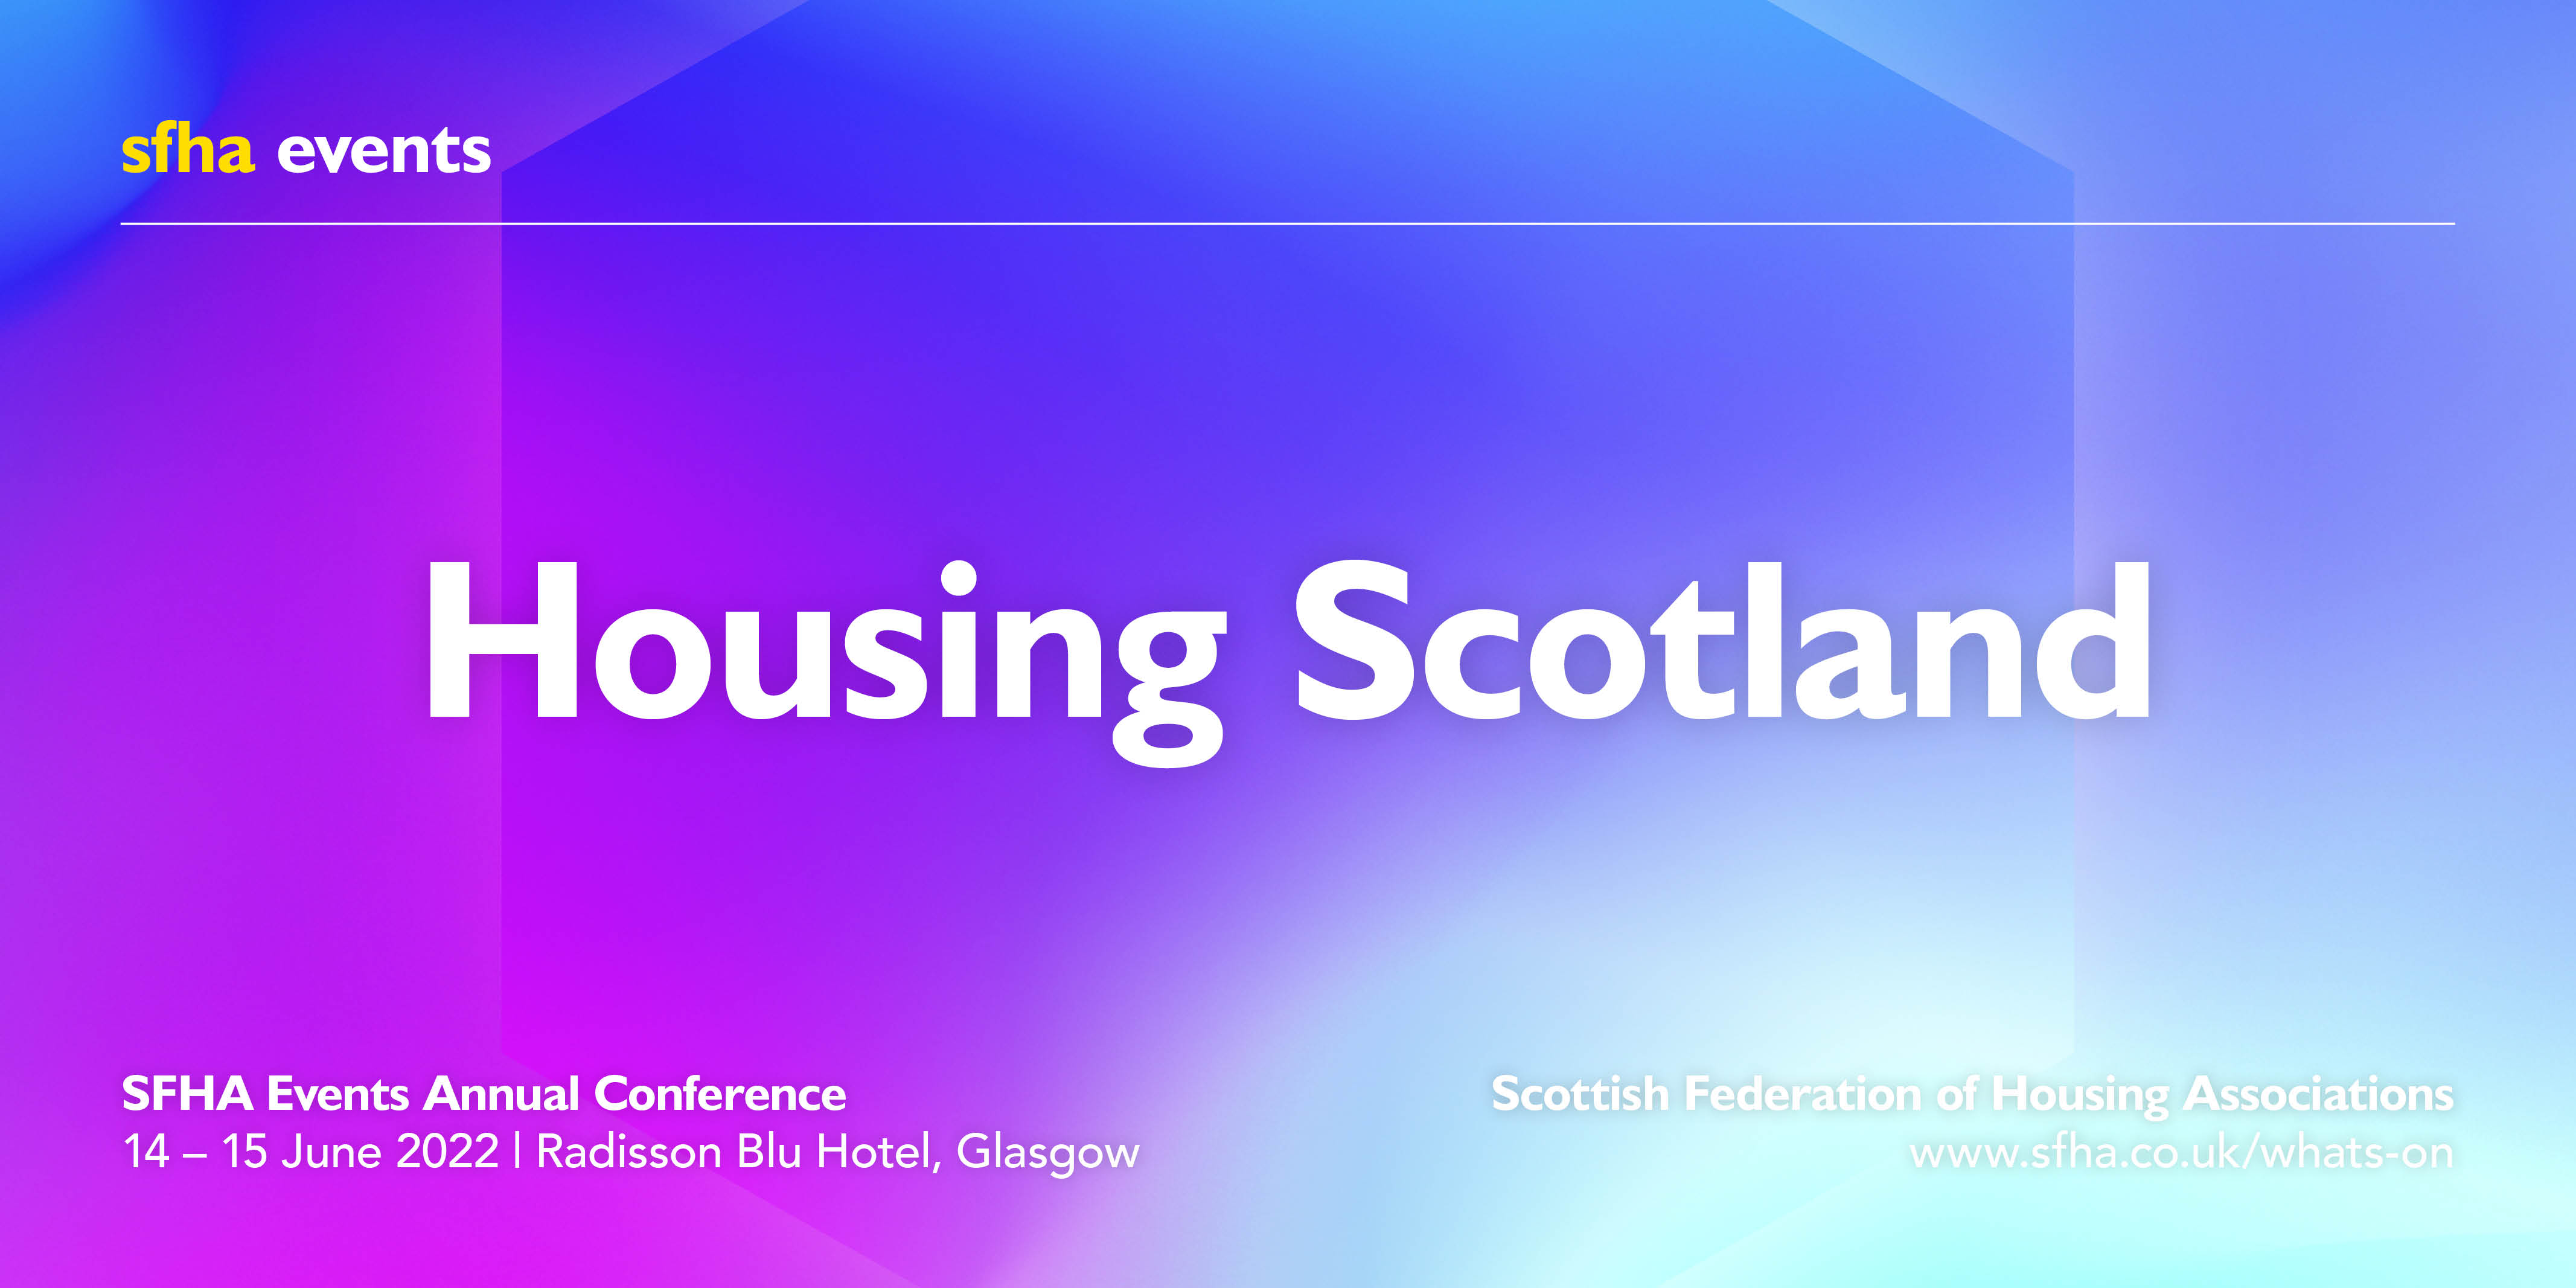 One month to go until SFHA Annual Conference Housing Scotland 2022